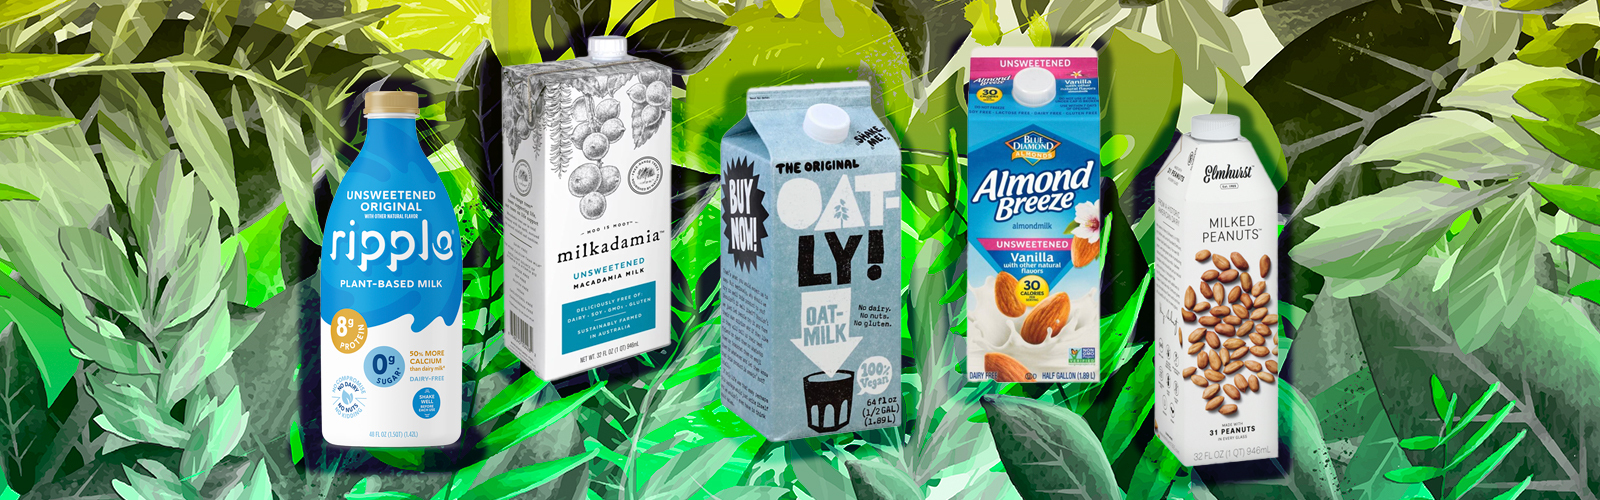 A Complete Guide To Every PlantBased Milk On The Market & What They